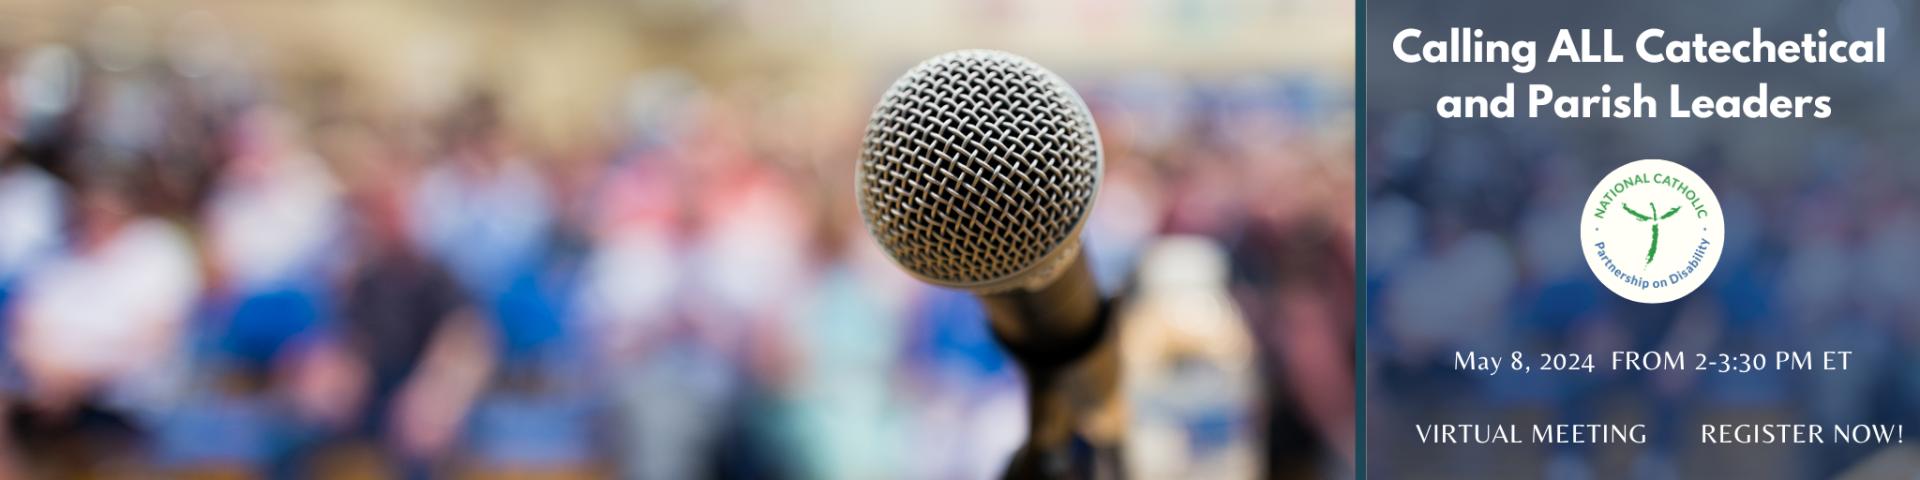 Microphone before a crowd, advertising event